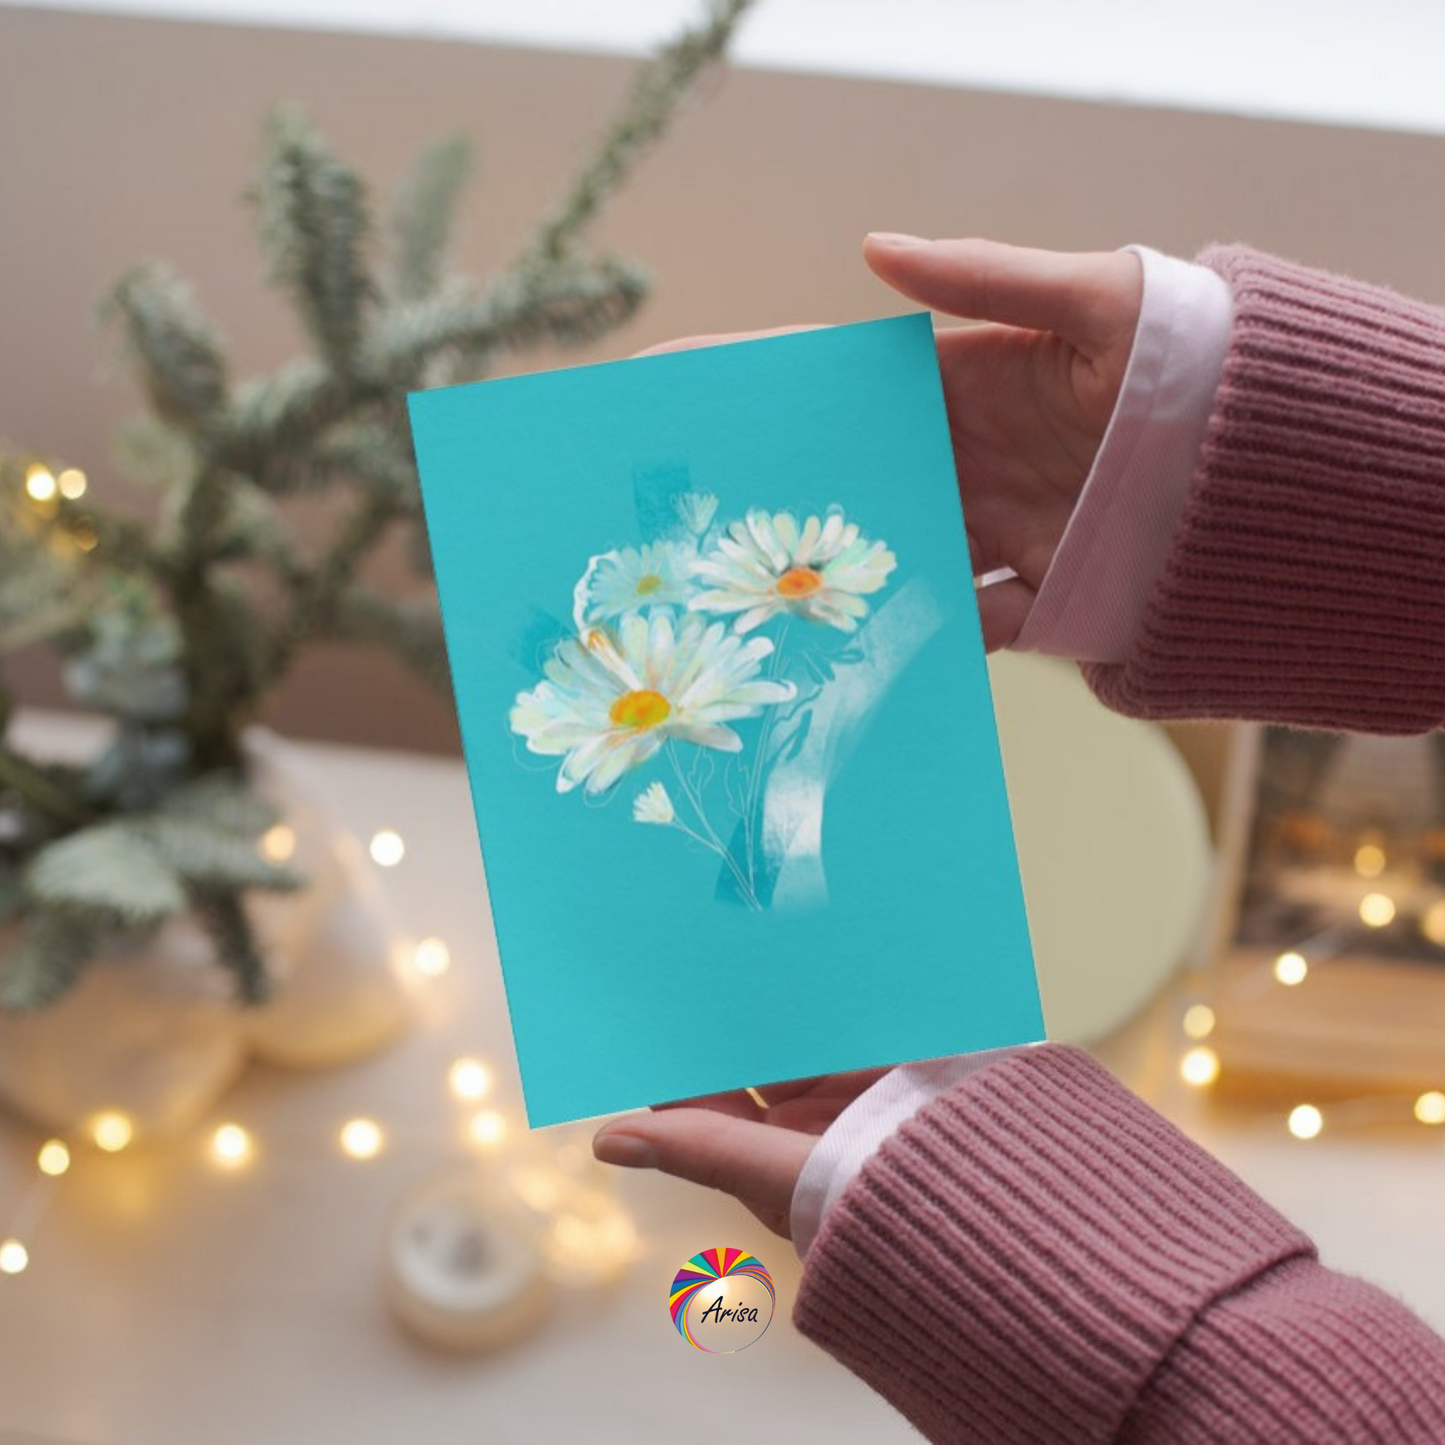 "DAISY" Greeting Card by ArisaTeam in the hands of a woman ideal as a Christmas card.